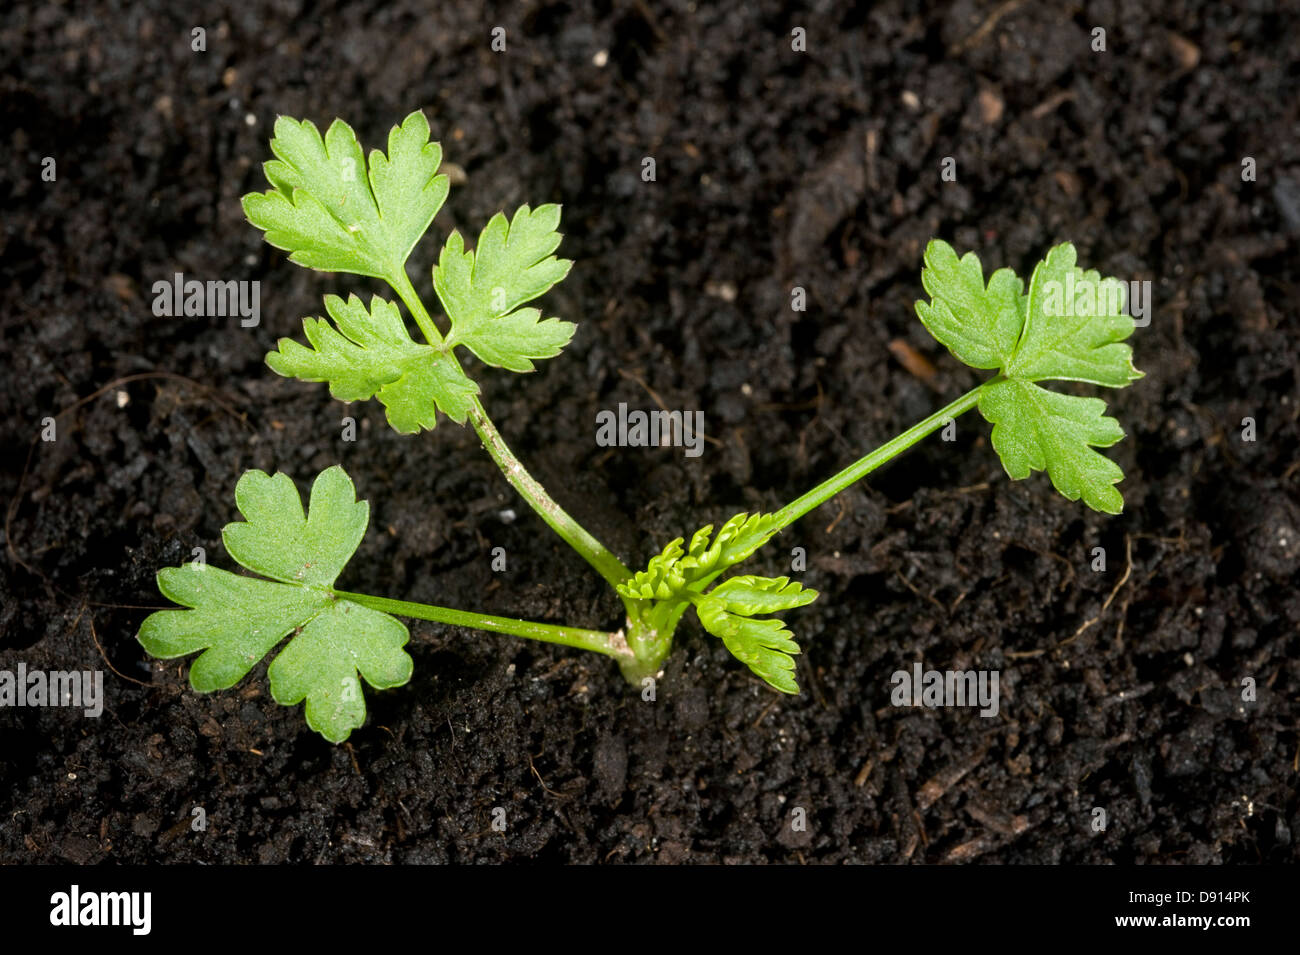 Young plant of fool's parsley, Aethusa cynapium, an annual arable and garden weed Stock Photo